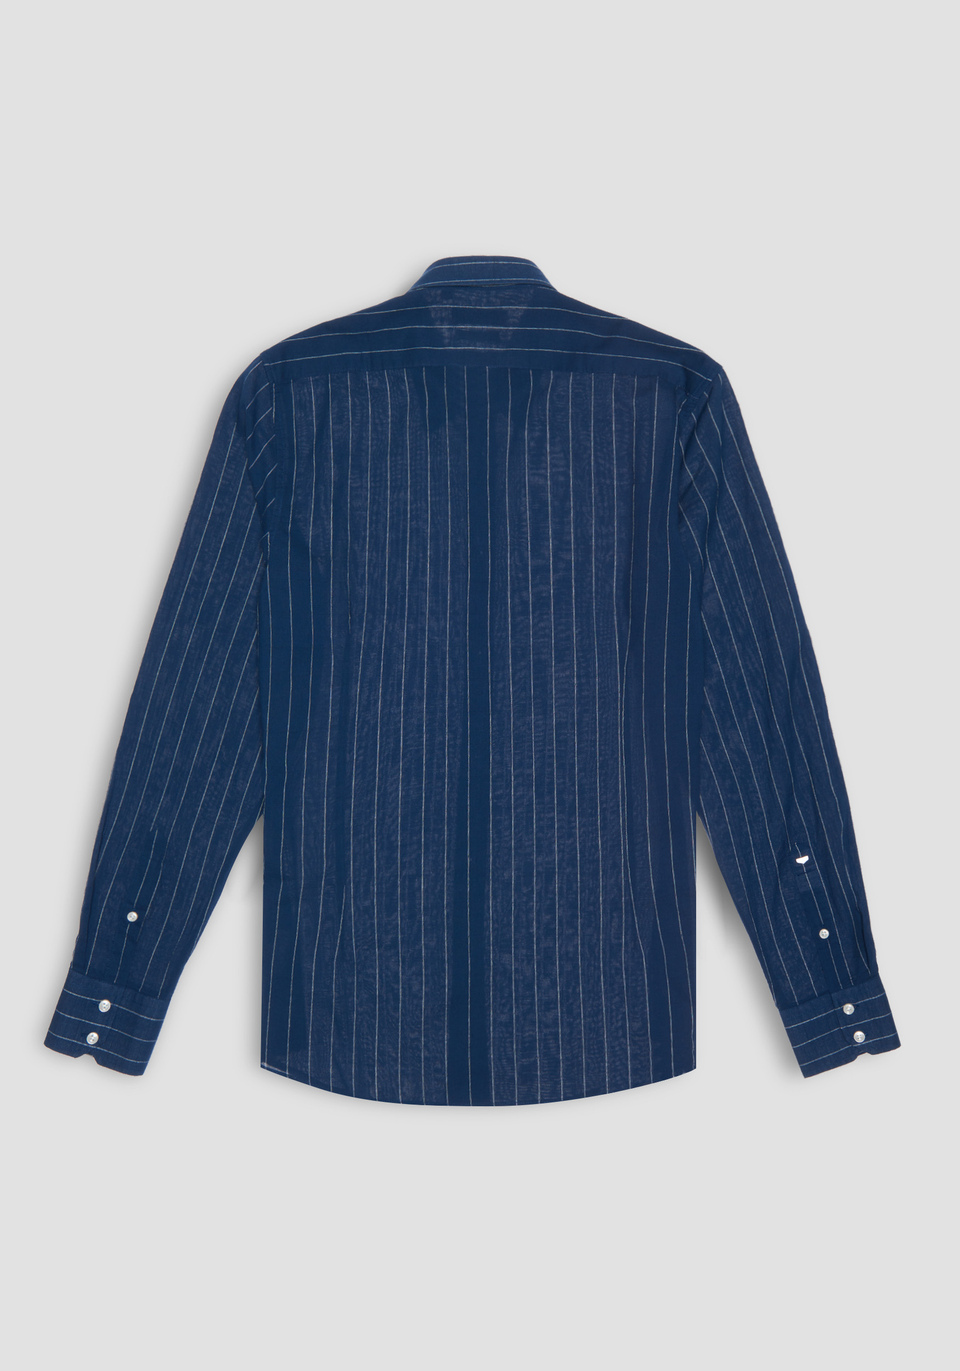 SLIM-FIT SHIRT IN LIGHTWEIGHT COTTON WITH A MICRO-STRIPE PATTERN - Antony Morato Online Shop